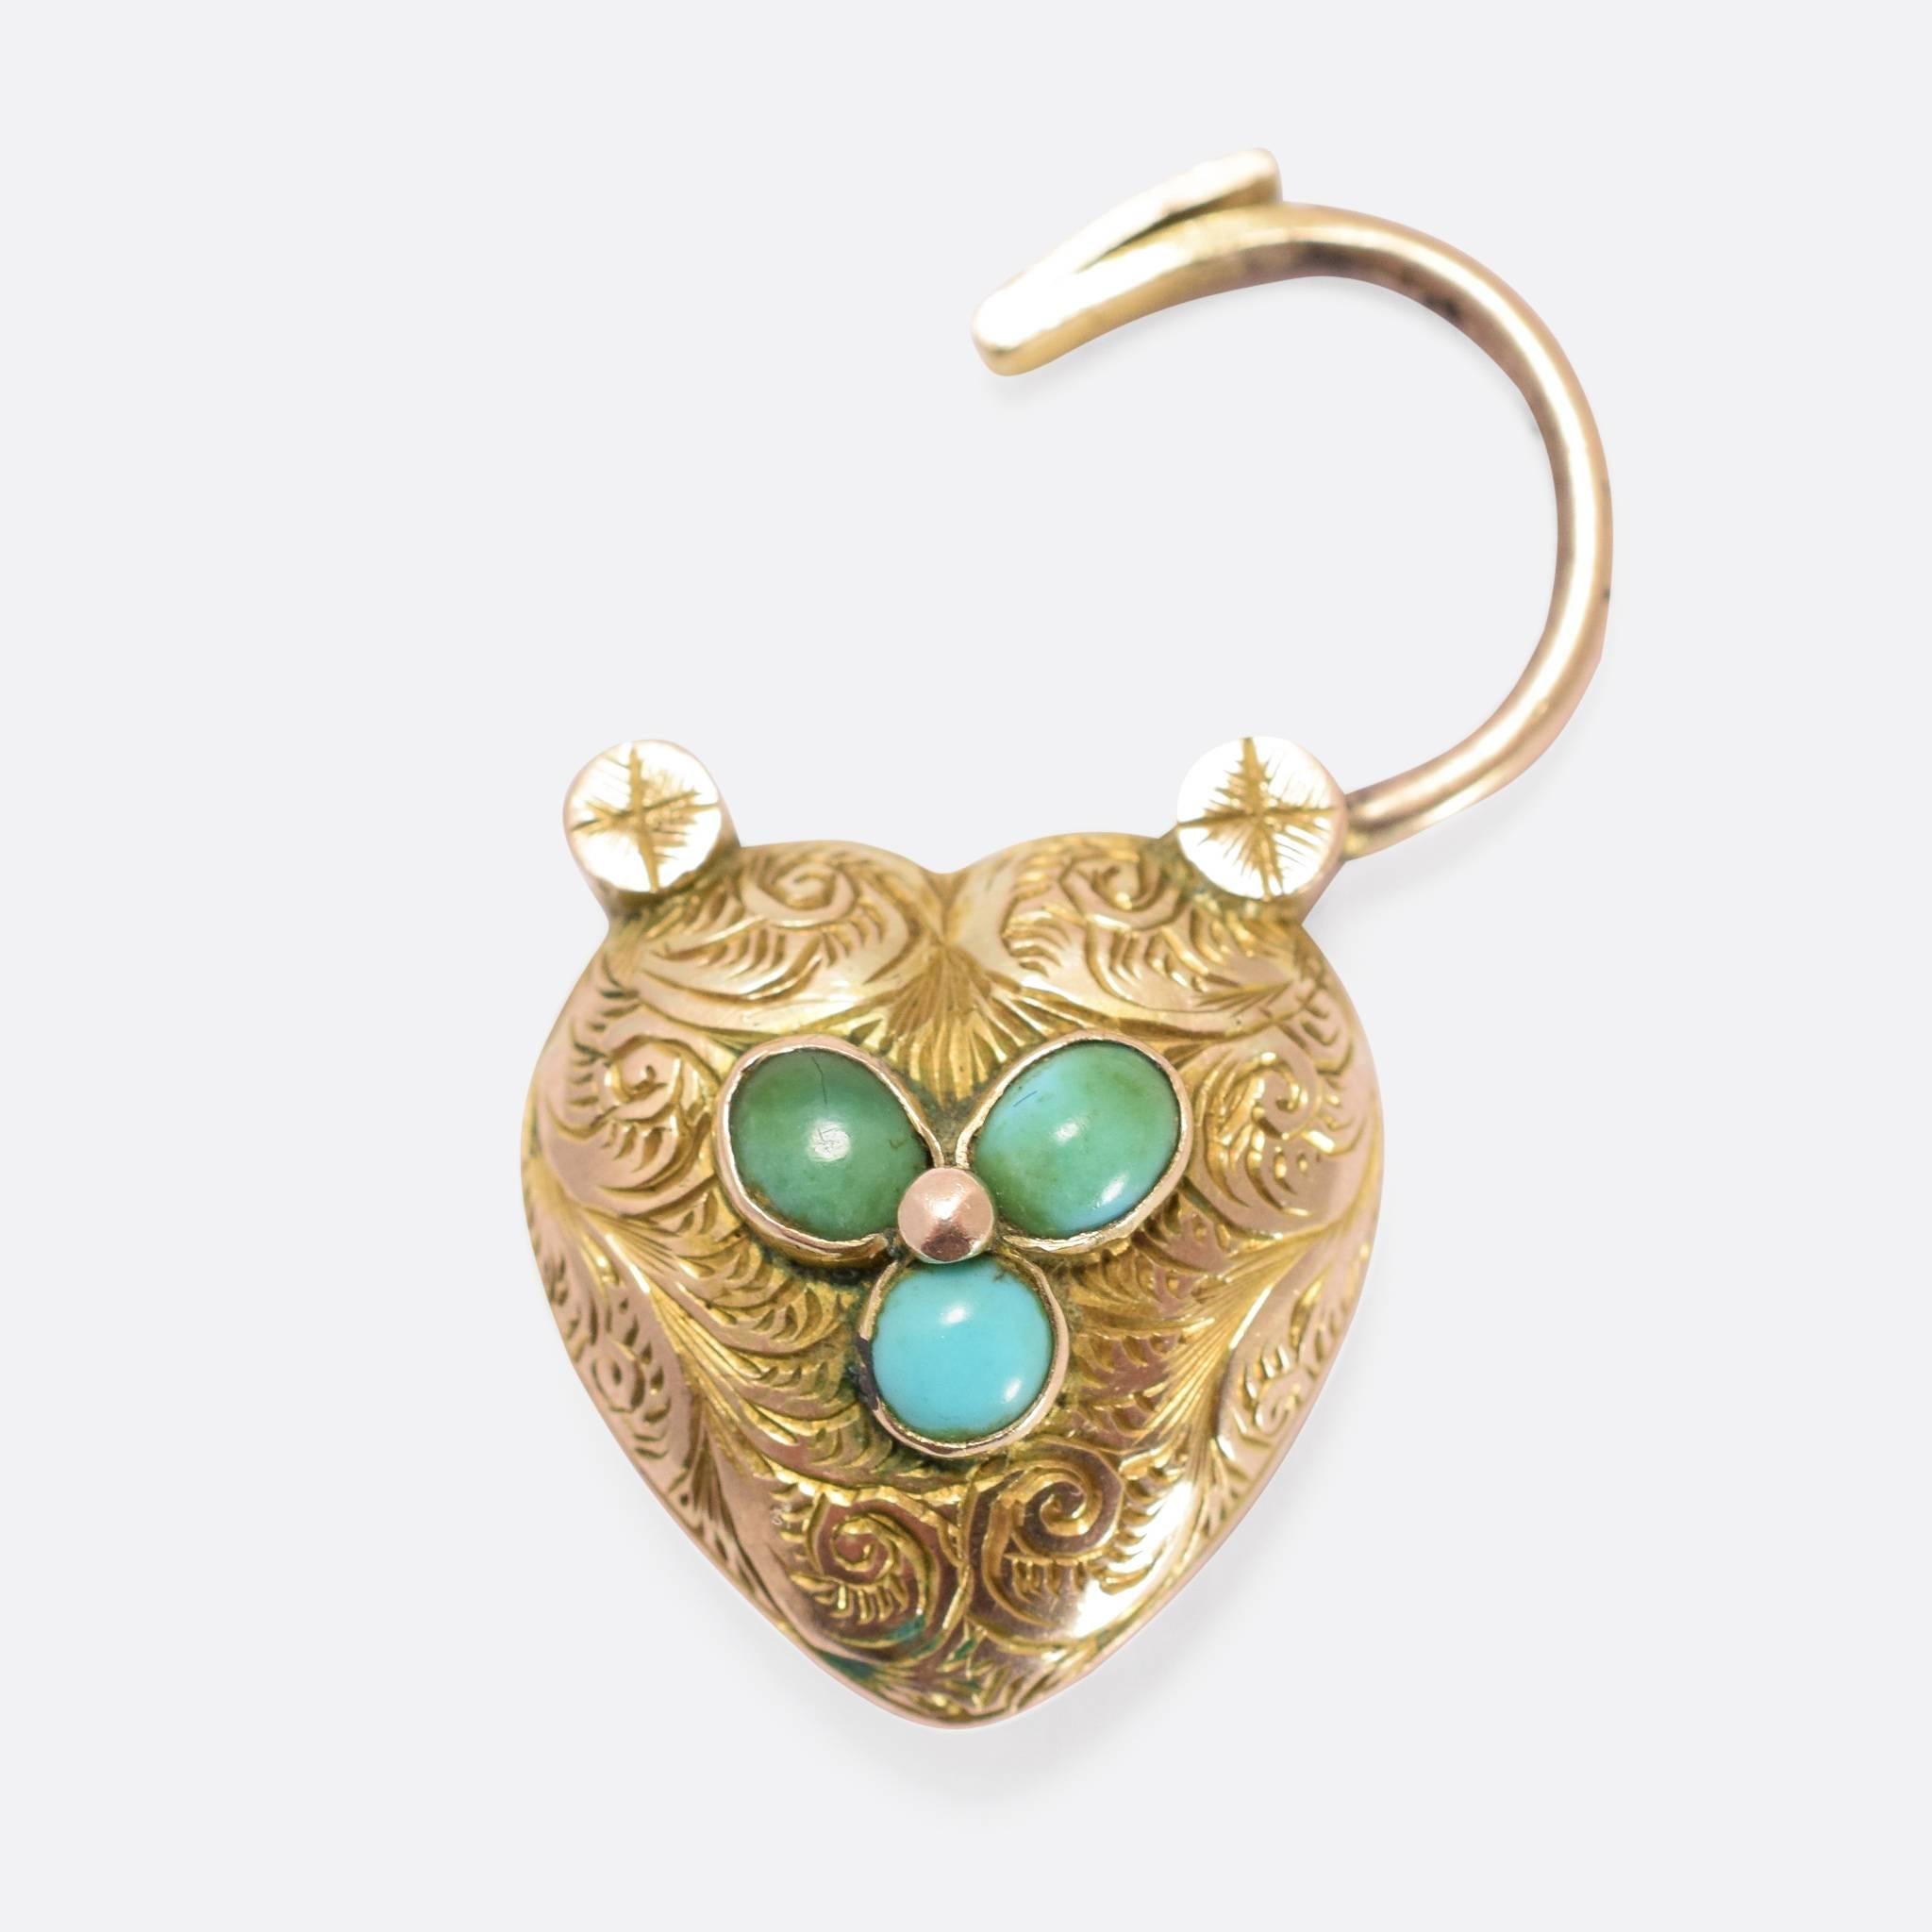 This beautiful antique bracelet features a fine fancy link chain, and a rather special locket clasp. Set with three turquoise cabochons, the clasp is shaped like a heart padlock, with a locket compartment to the back, and pretty hand-chased detail